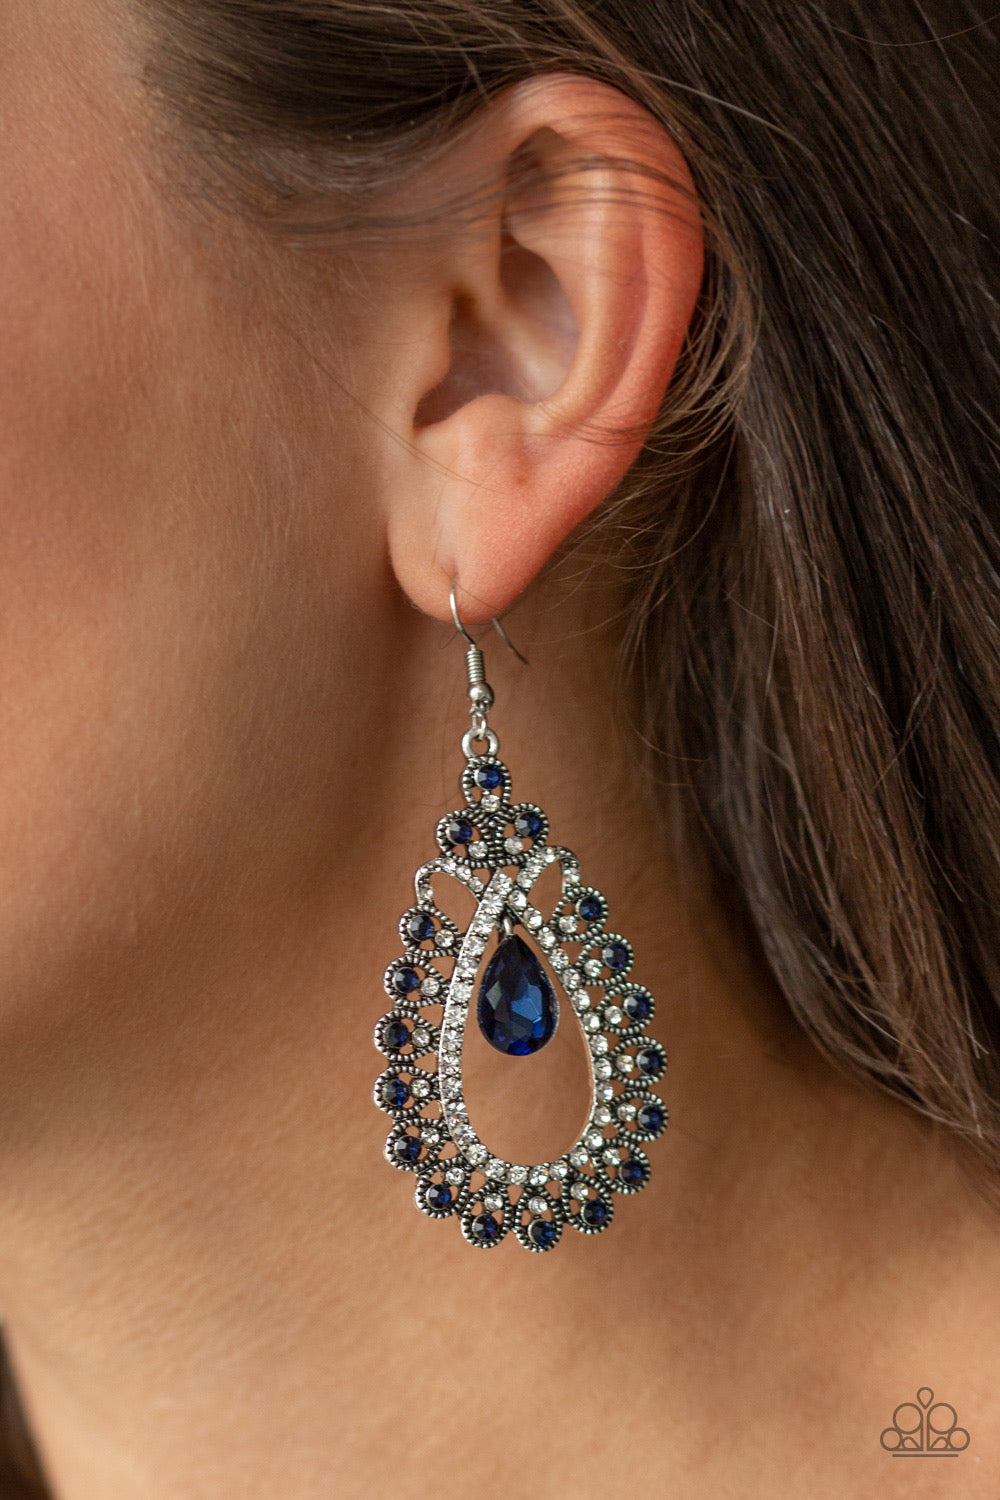 All About Business Earrings - Blue